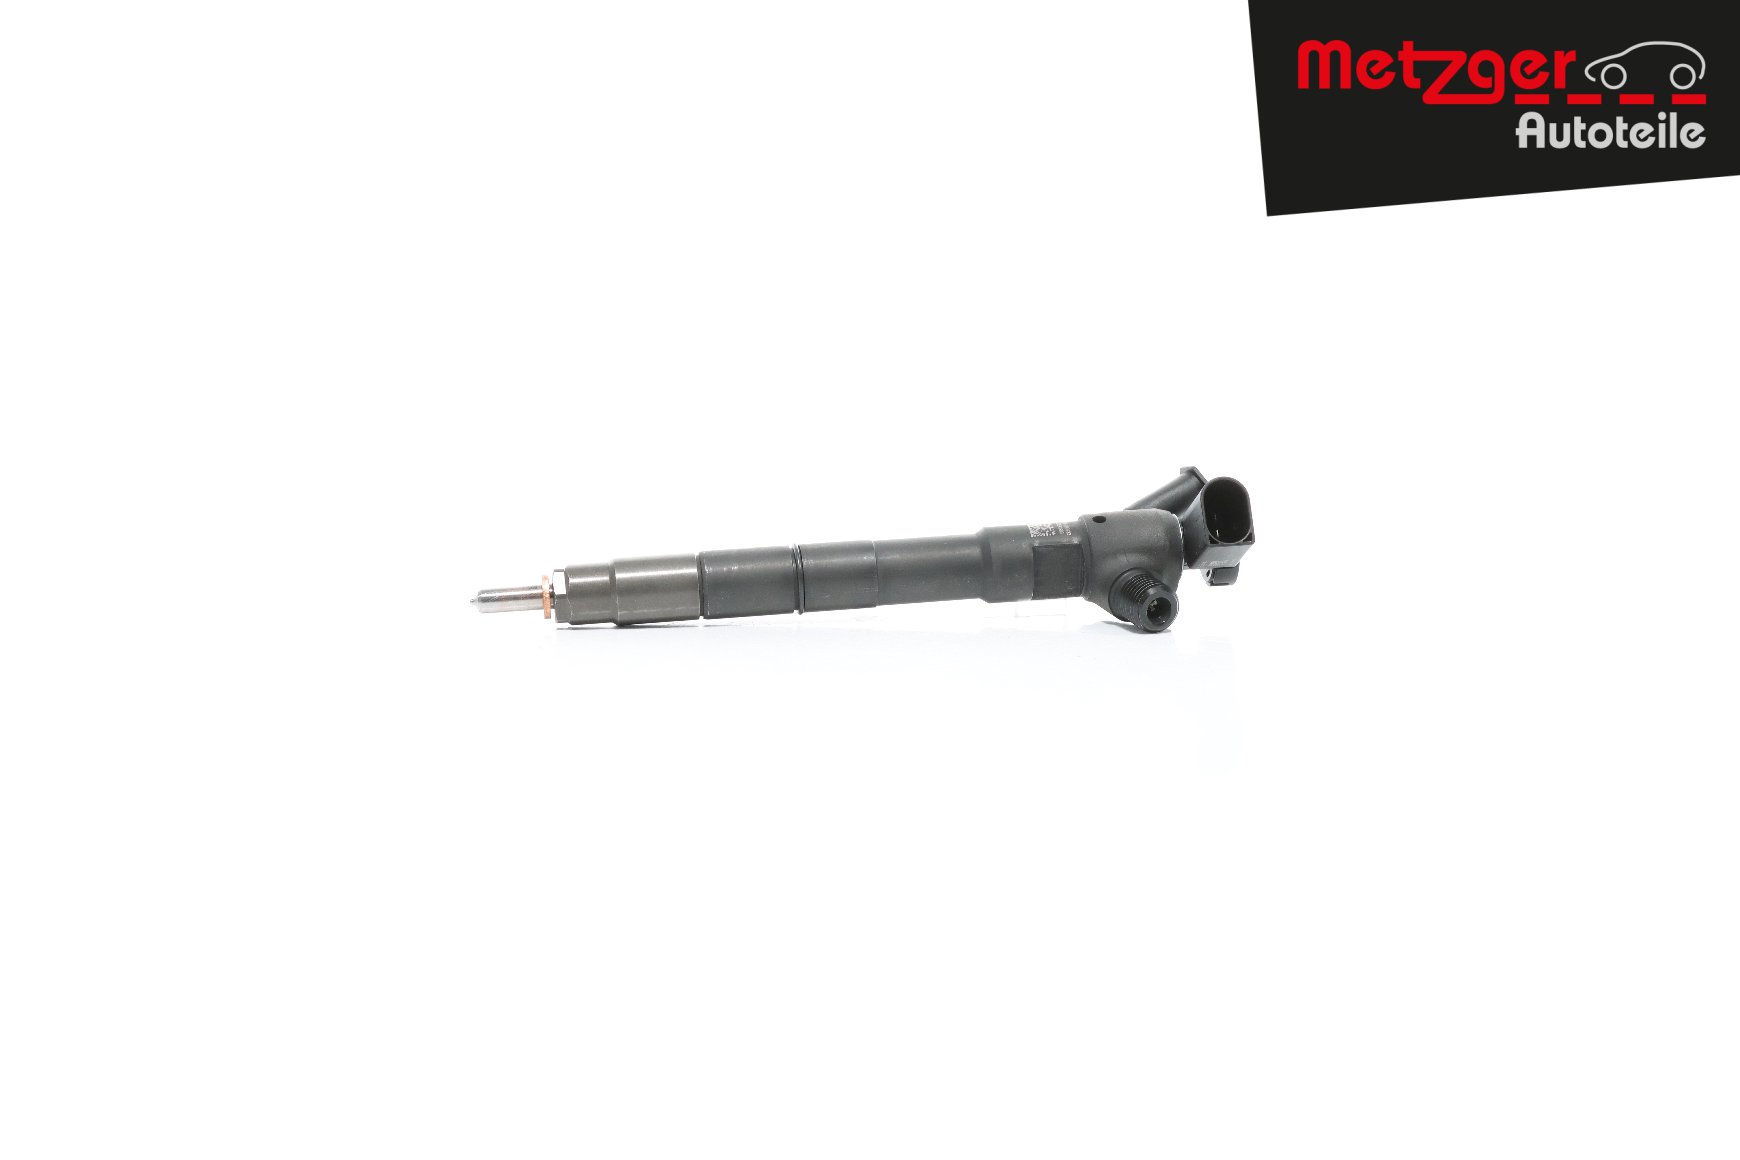 METZGER Injector nozzles diesel and petrol Golf Mk7 new 0871023